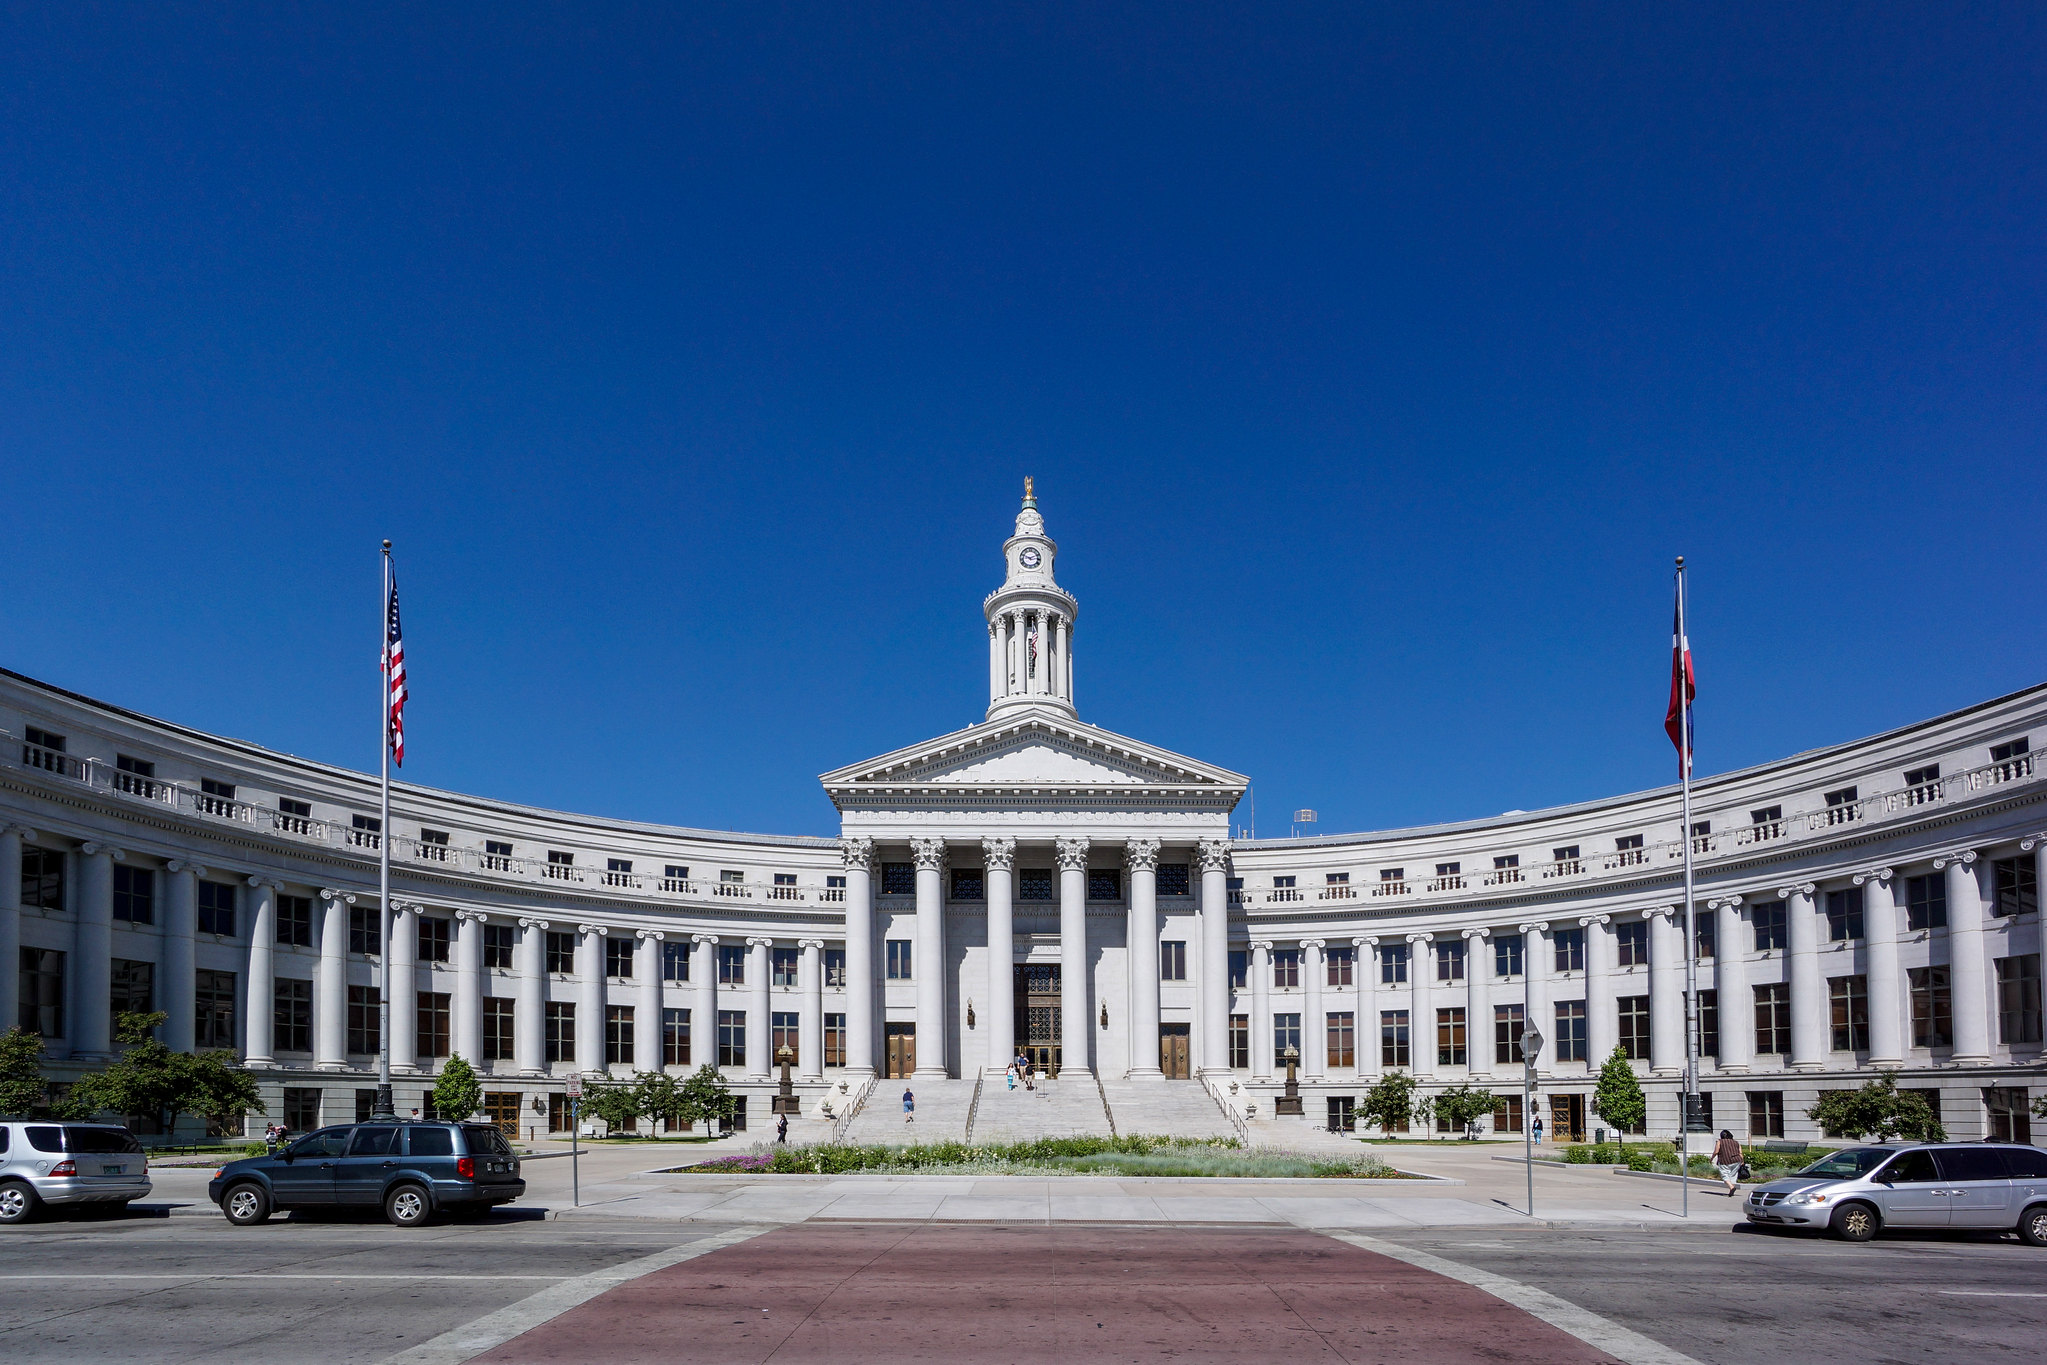 a white government building with columns